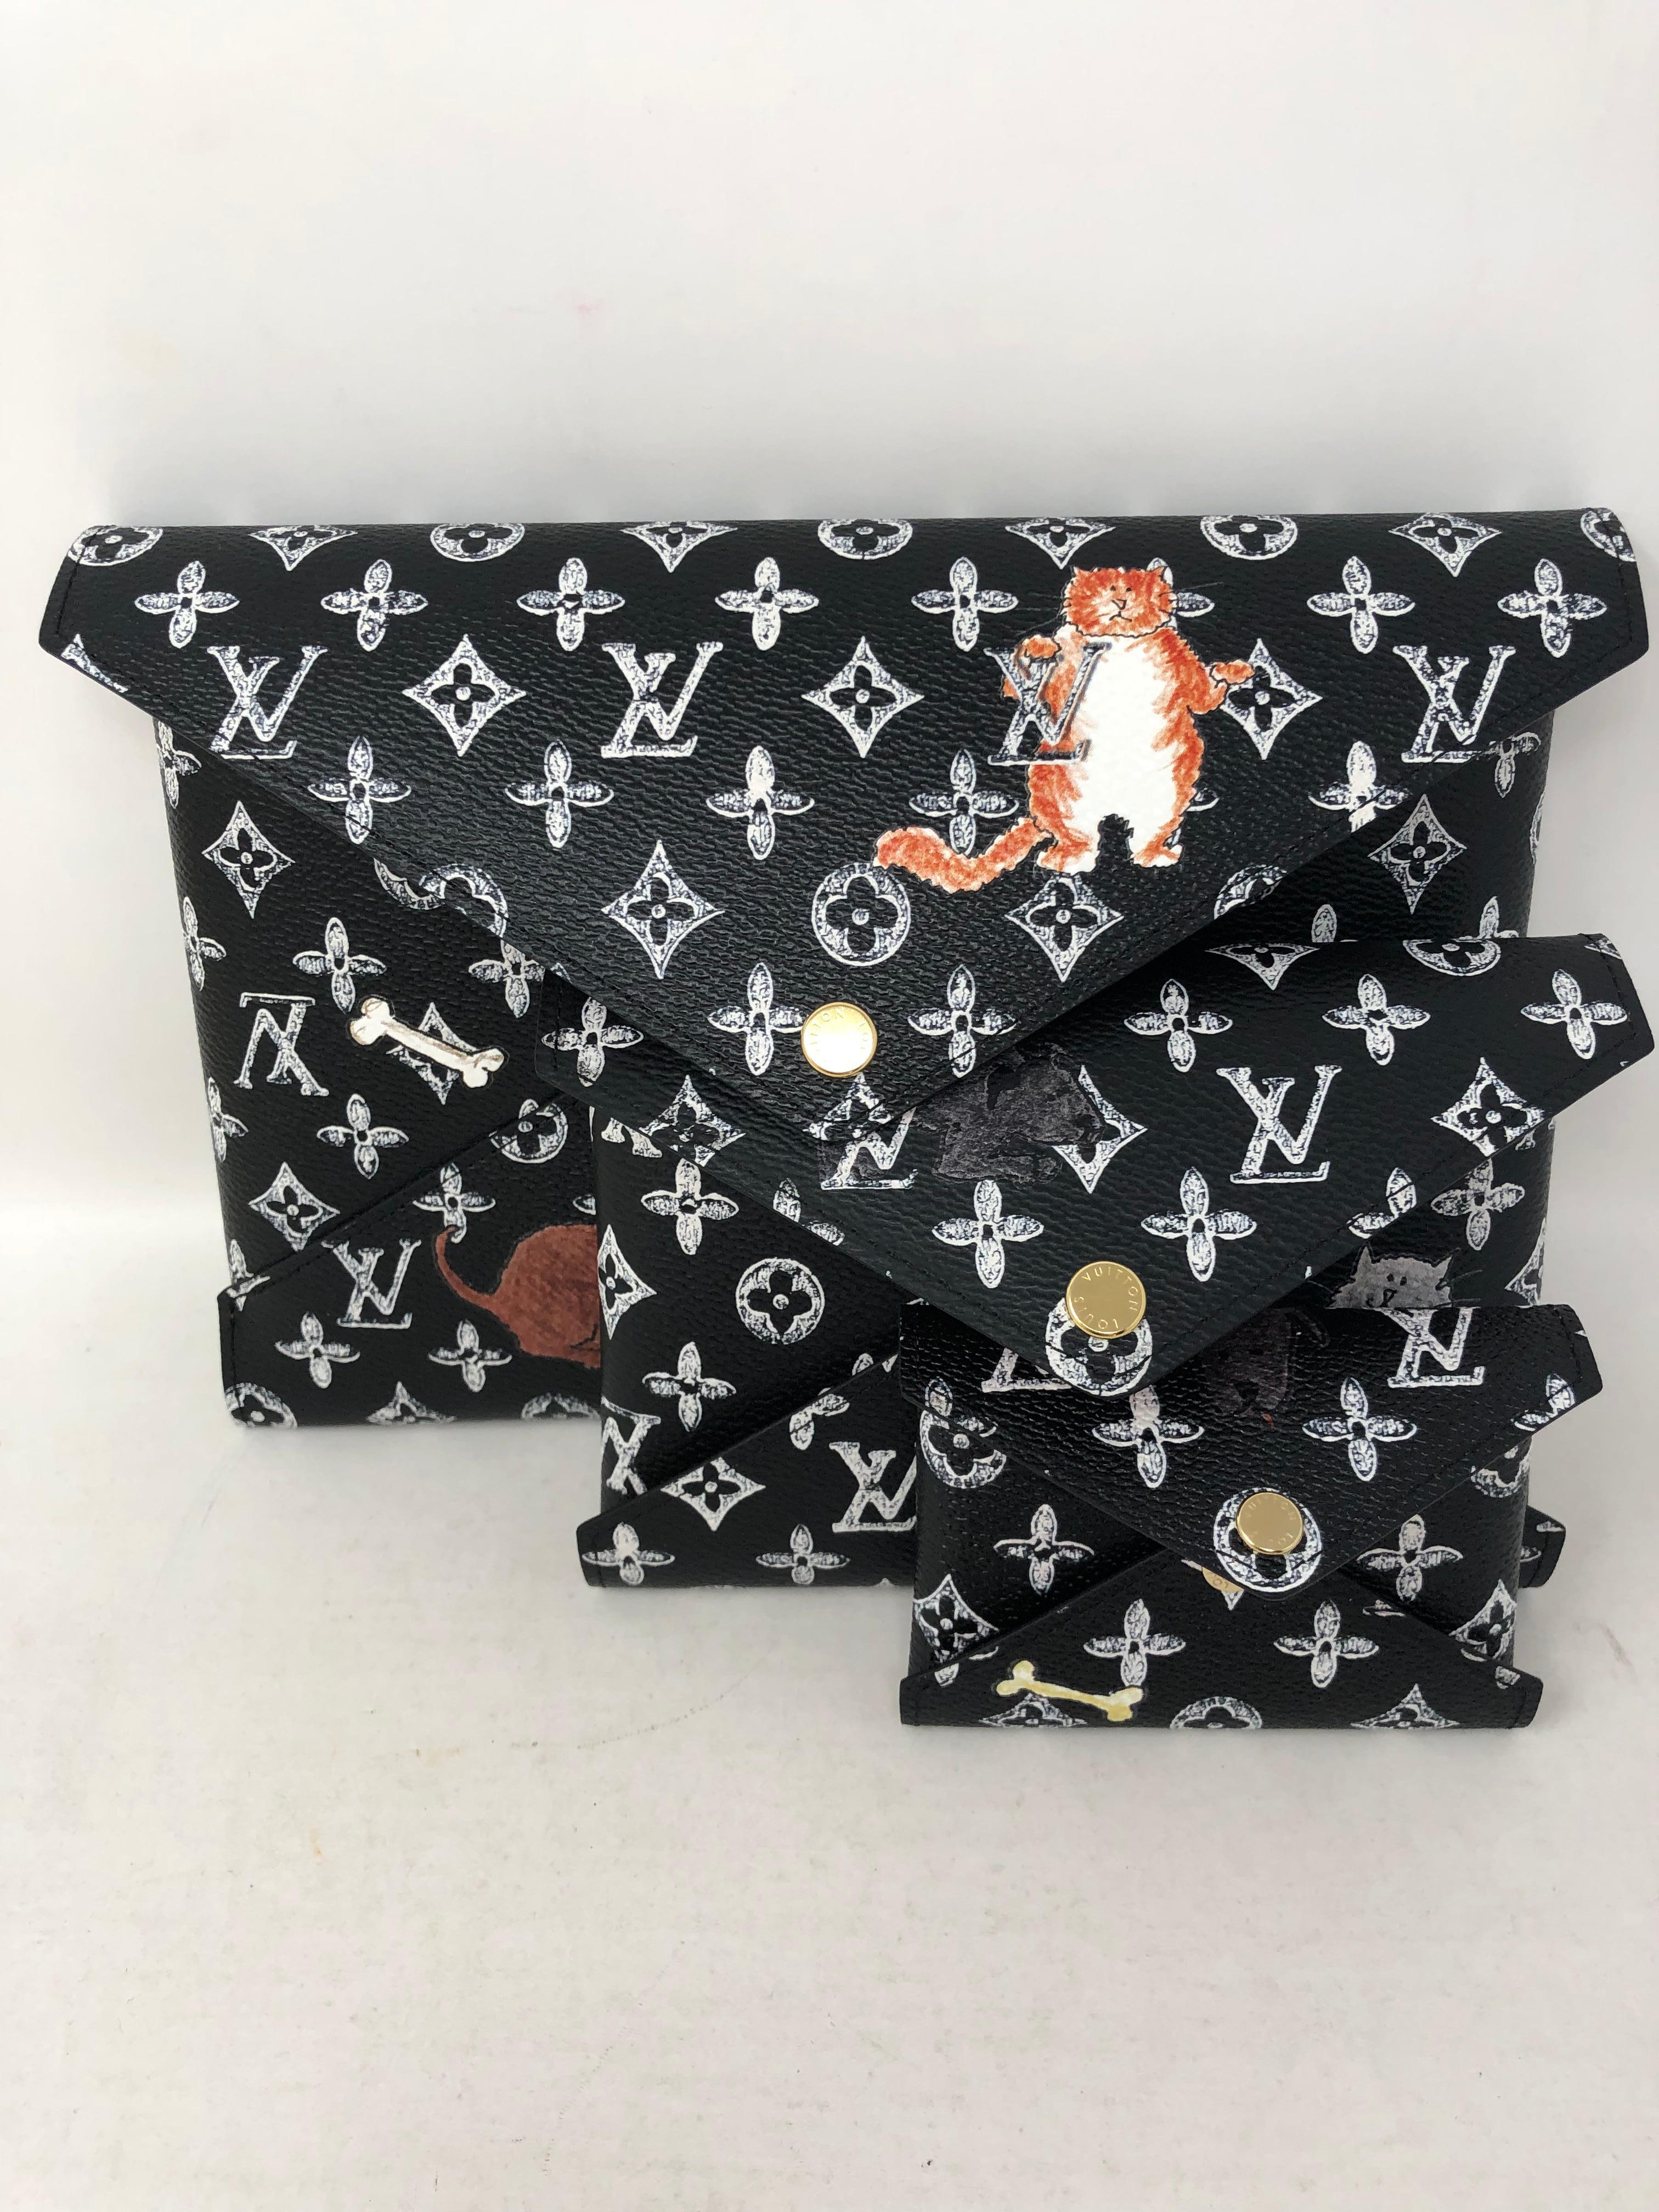 Louis Vuitton Kirigami Monogram Catogram Large Clutch. Designed by Grace Coddington for LV. Pop Up Exclusive. Very limited and rare. The Kirigami is a 3 piece set that is functional for everyday or for travel. Own this iconic piece. Includes